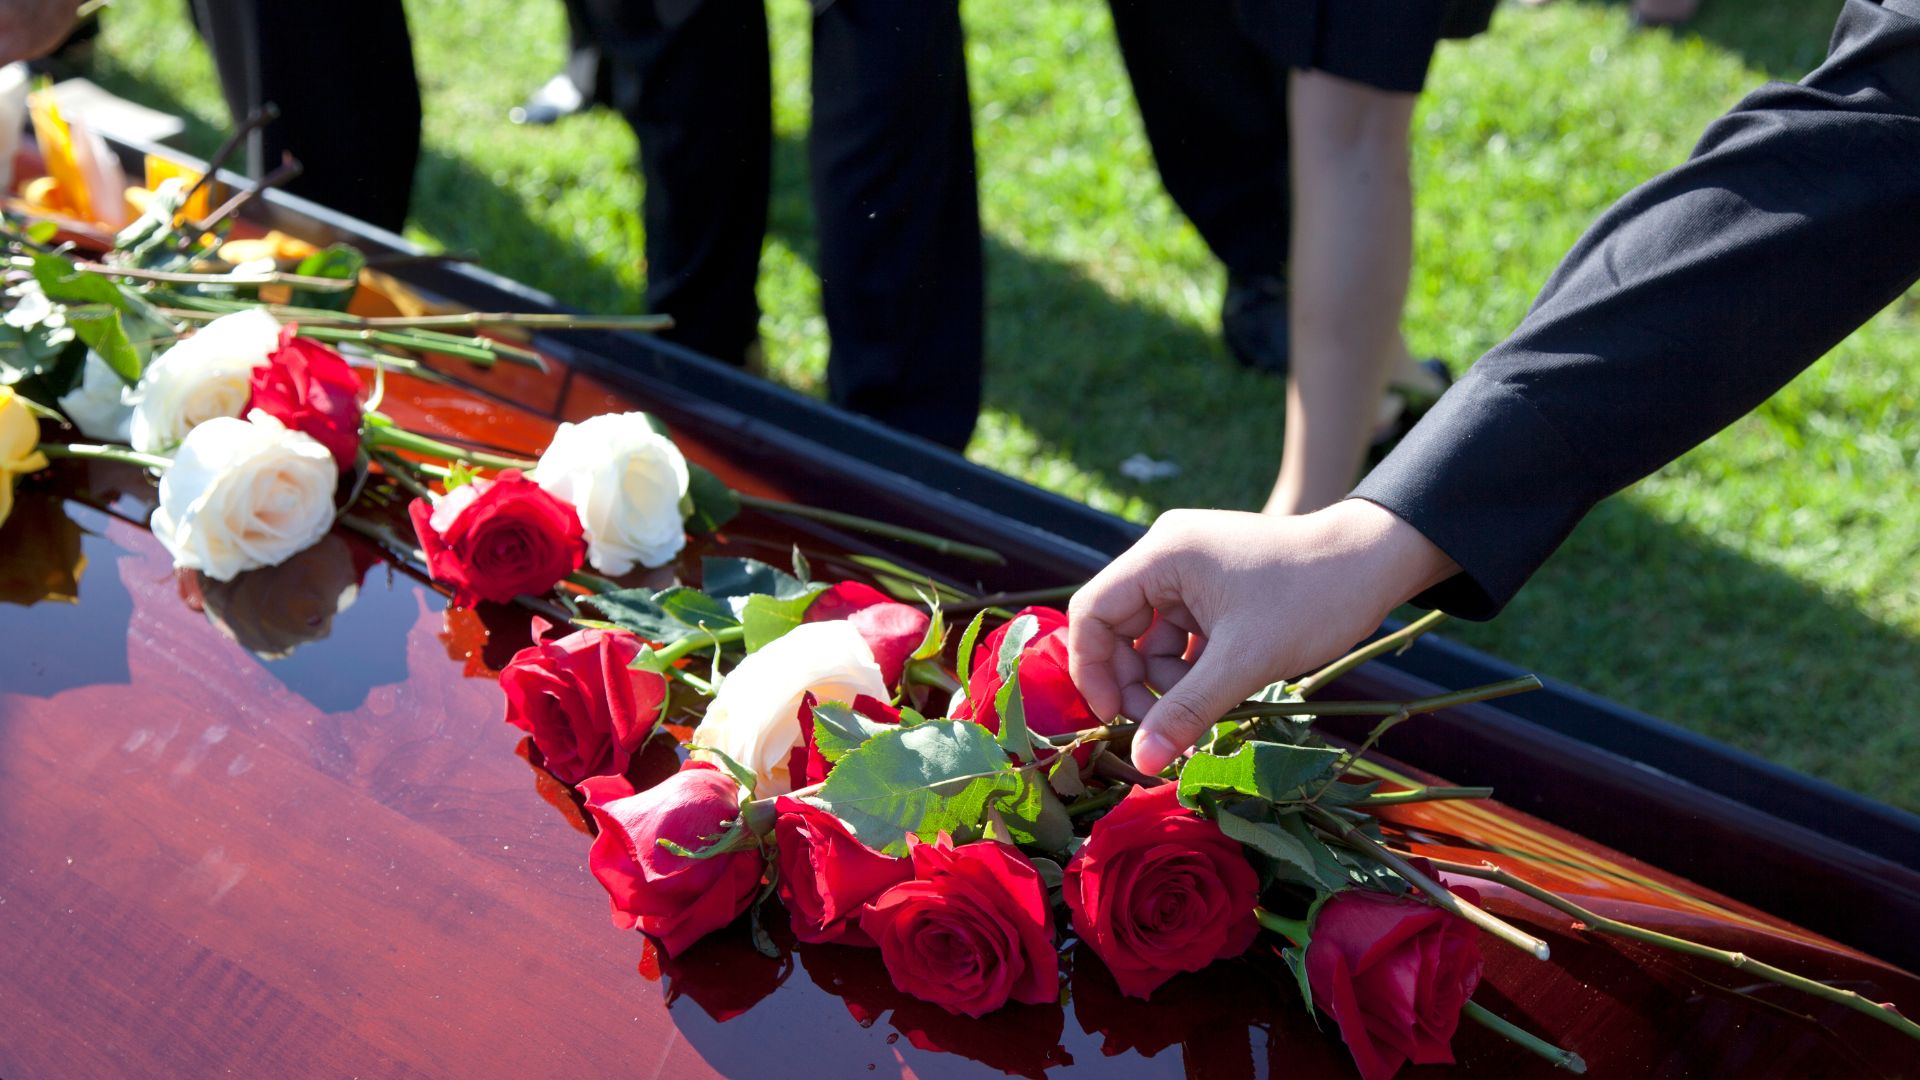 Laying flowers on a casket